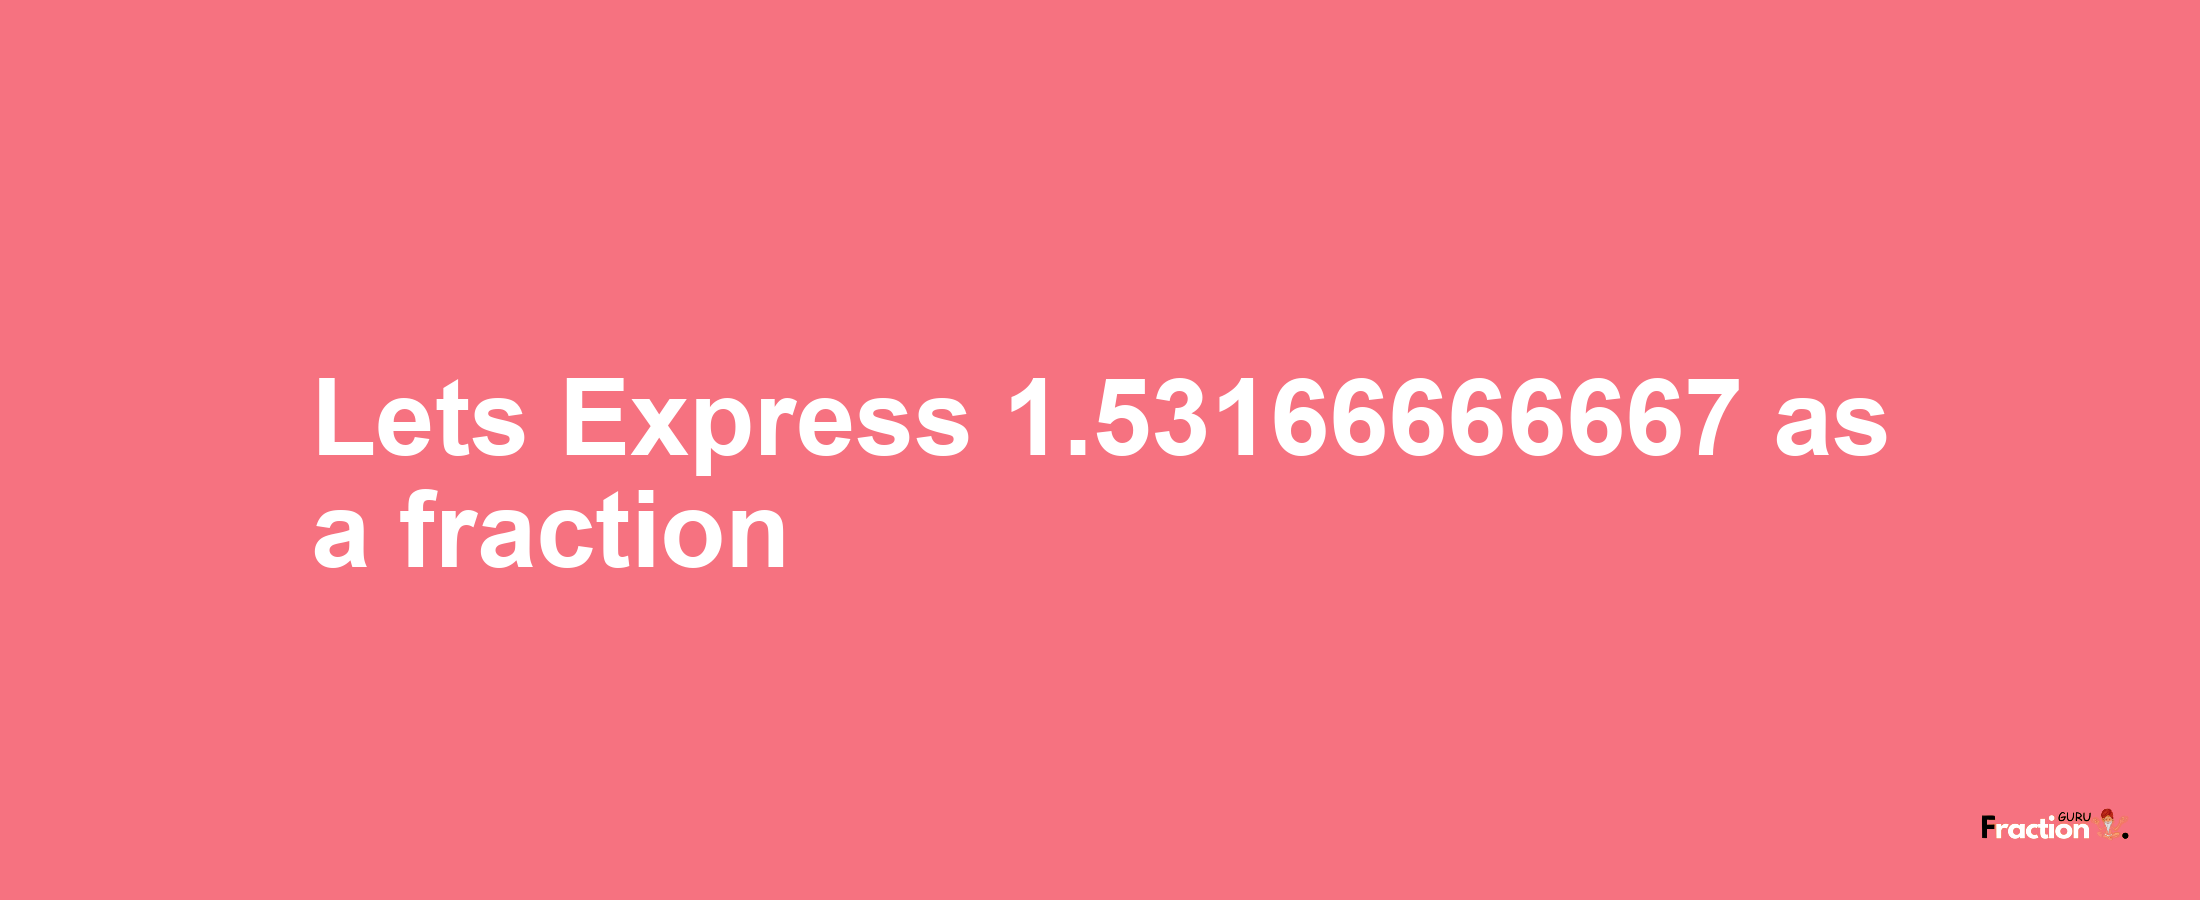 Lets Express 1.53166666667 as afraction